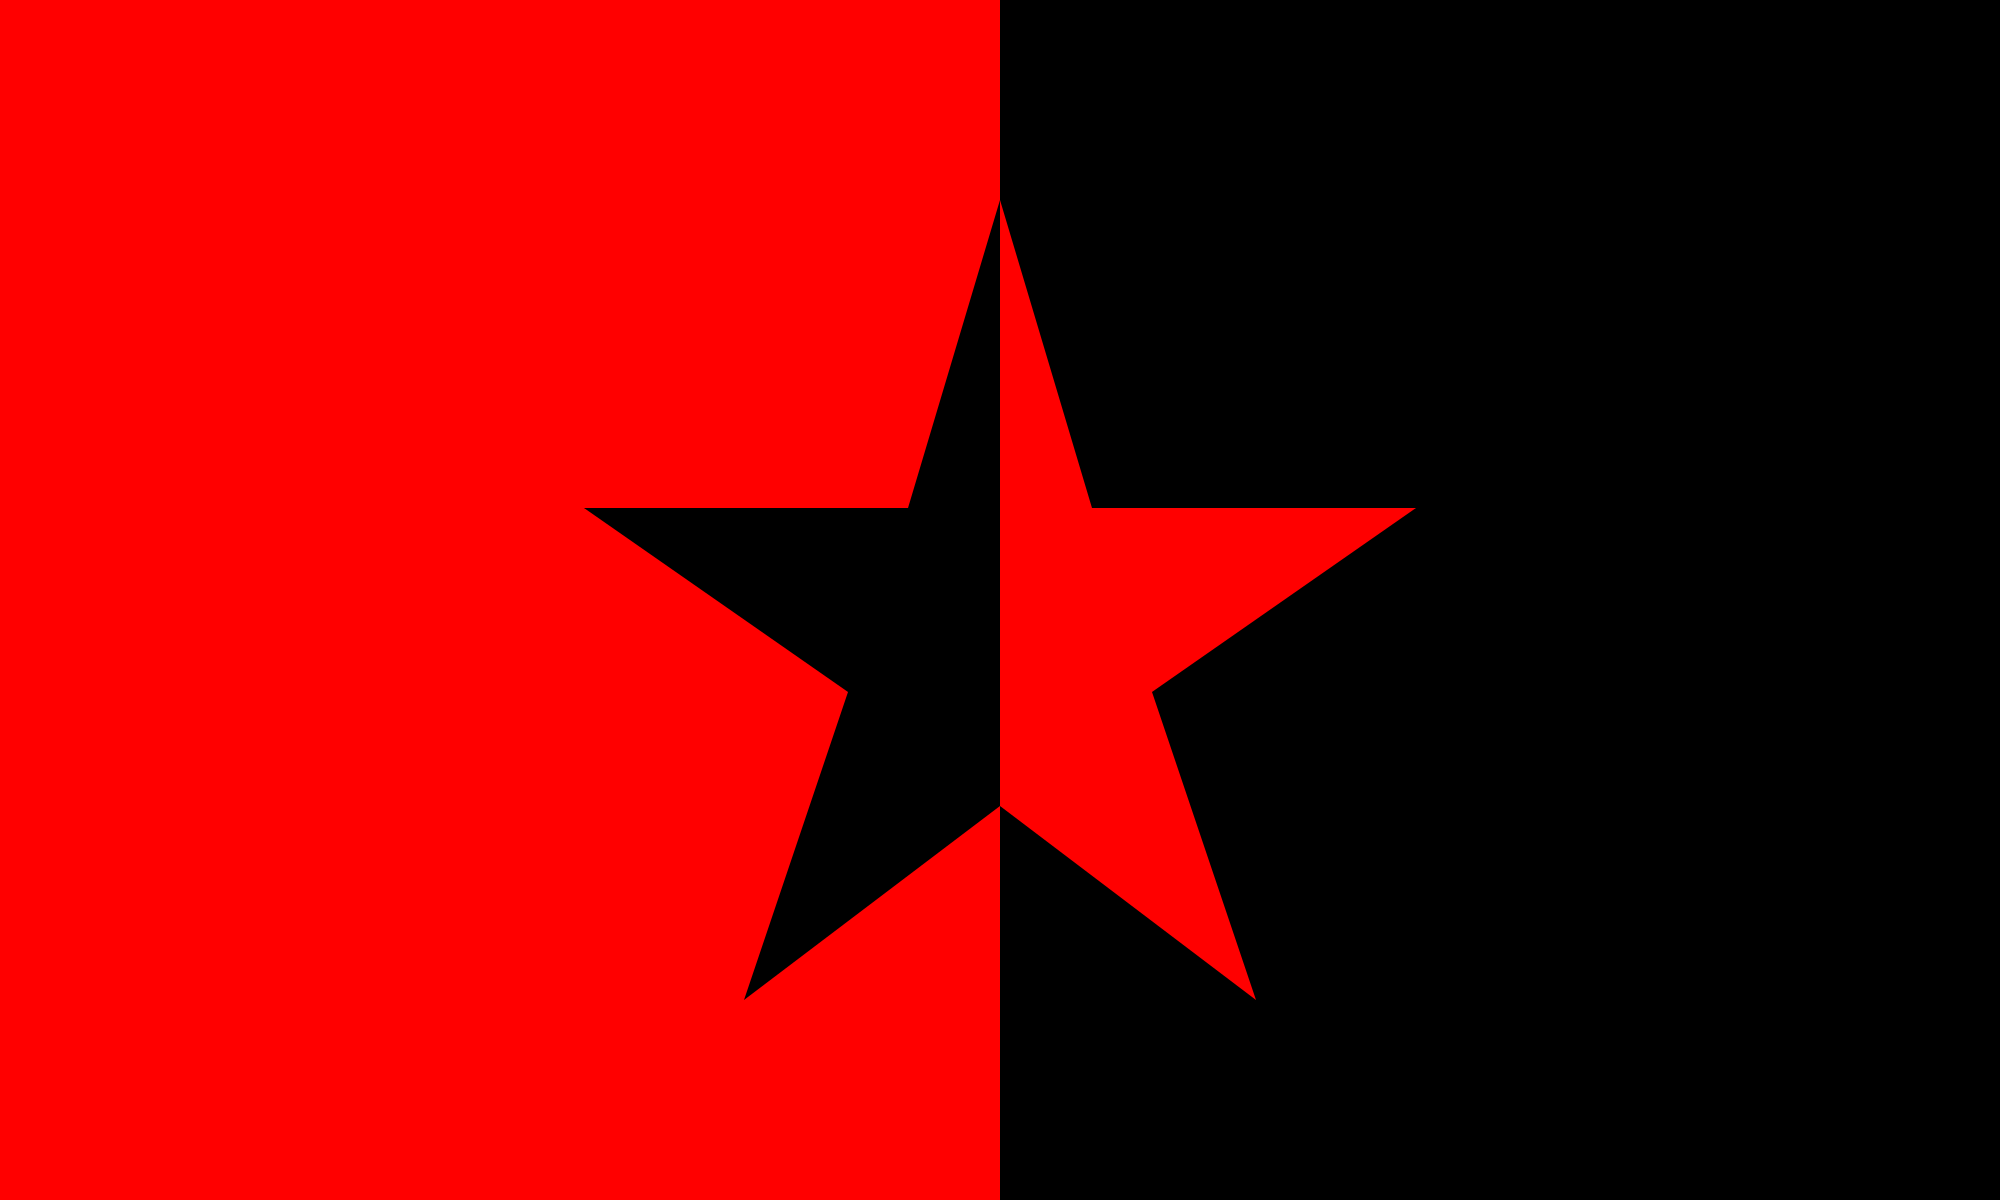 Black and Red Star Logo - File:Red black star flag.svg - Wikimedia Commons